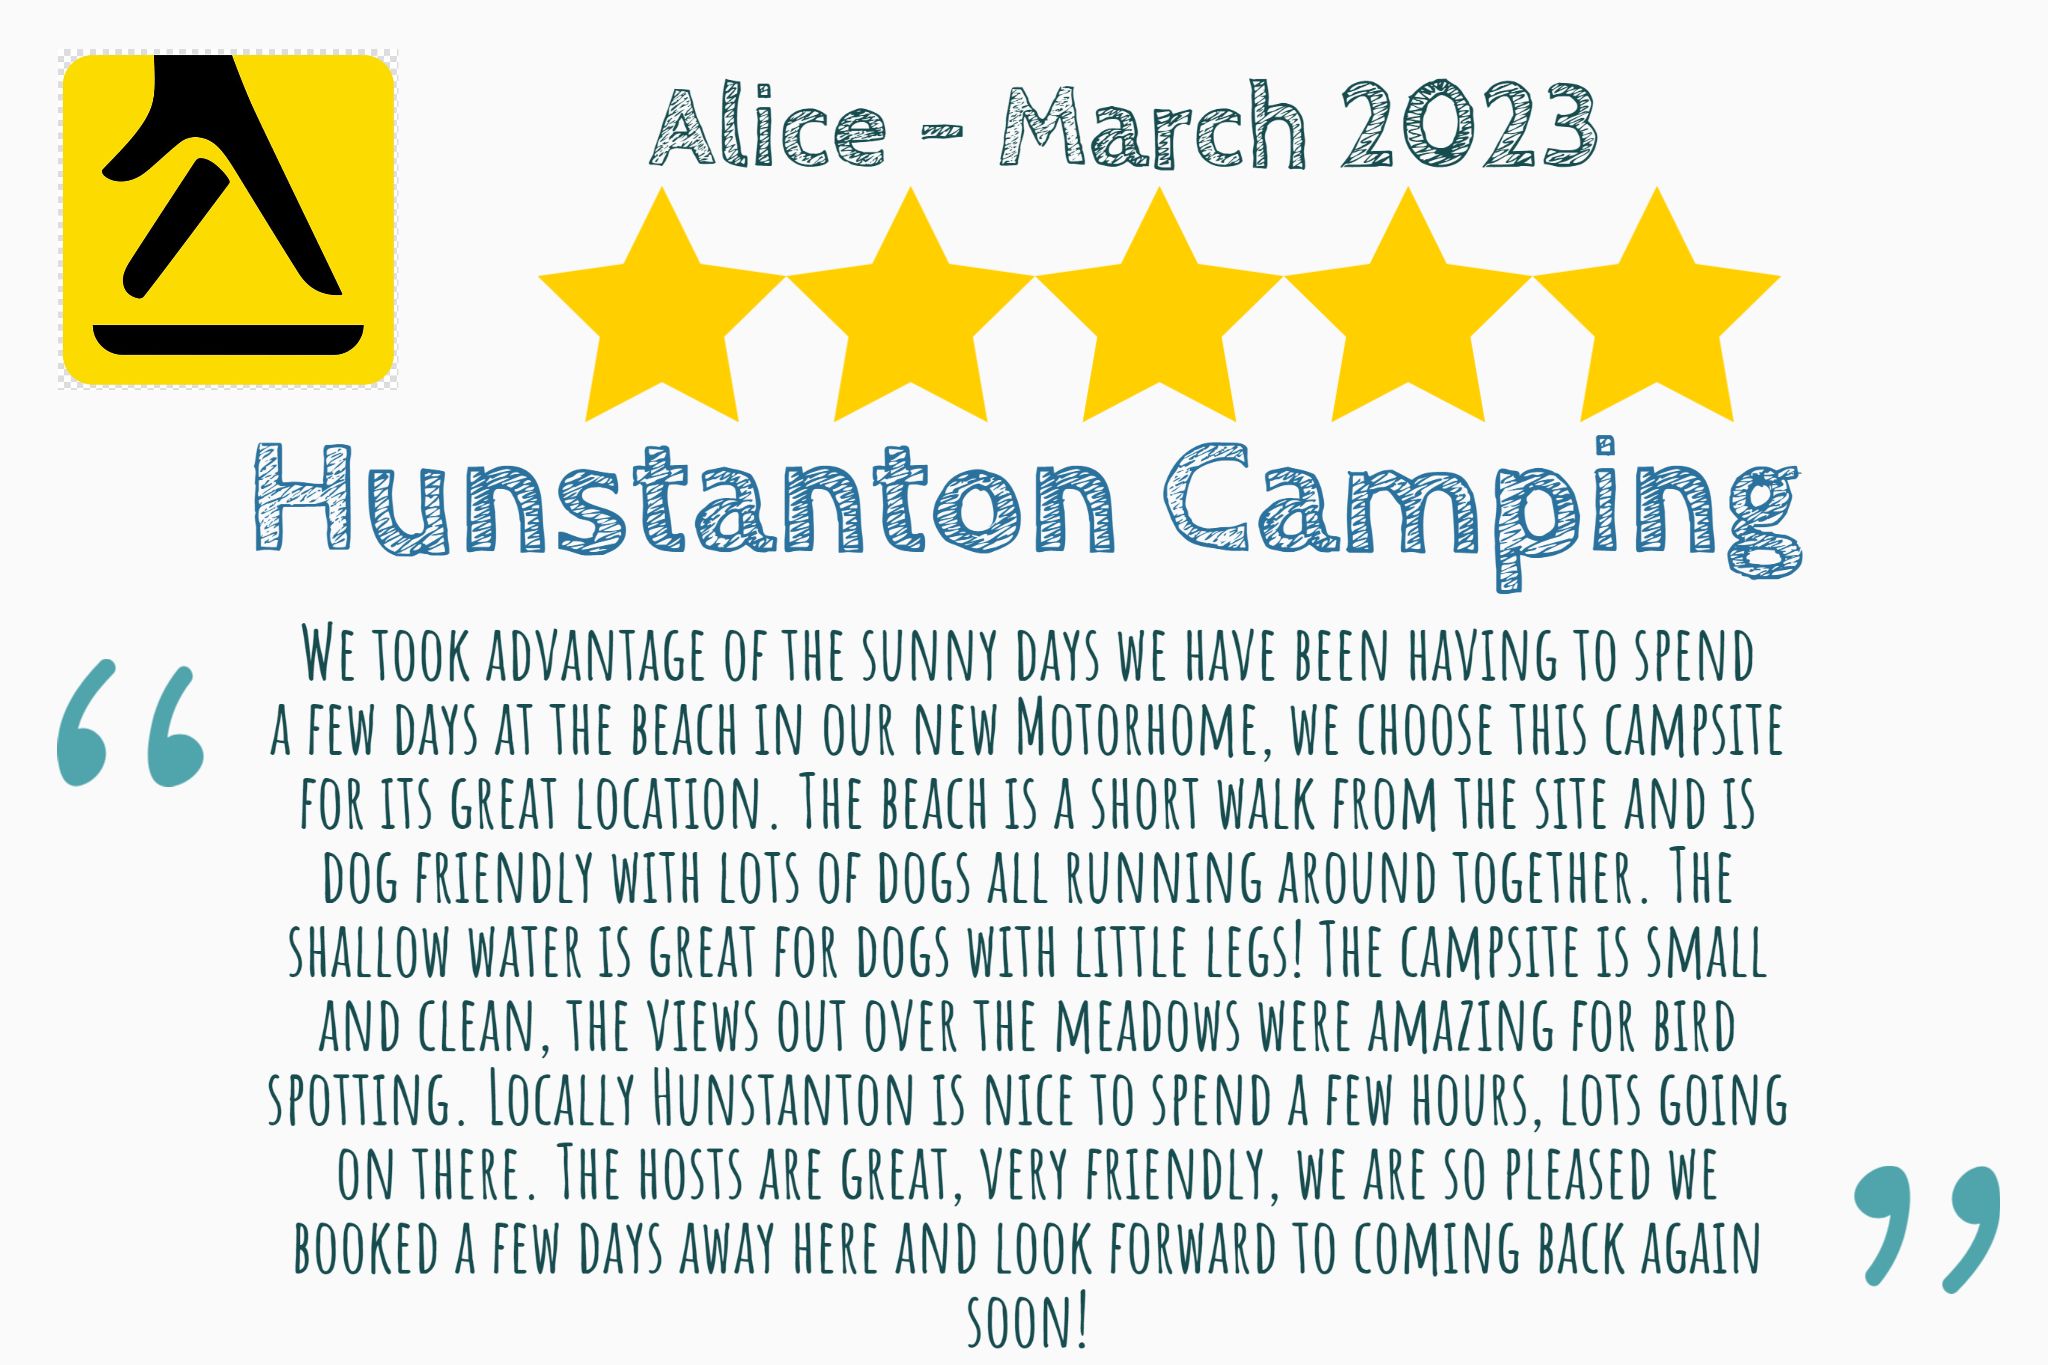 5 star yell review from Alice that says "We took advantage of the sunny days we have been having to spend a few days at the beach in our new Motorhome, we choose this campsite for its great location. The beach is a short walk from the site and is dog friendly with lots of dogs all running around together. The shallow water is great for dogs with little legs! The campsite is small and clean, the views out over the meadows were amazing for bird spotting. Locally Hunstanton is nice to spend a few hours, lots going on there. The hosts are great, very friendly, we are so pleased we booked a few days away here and look forward to coming back again soon!"